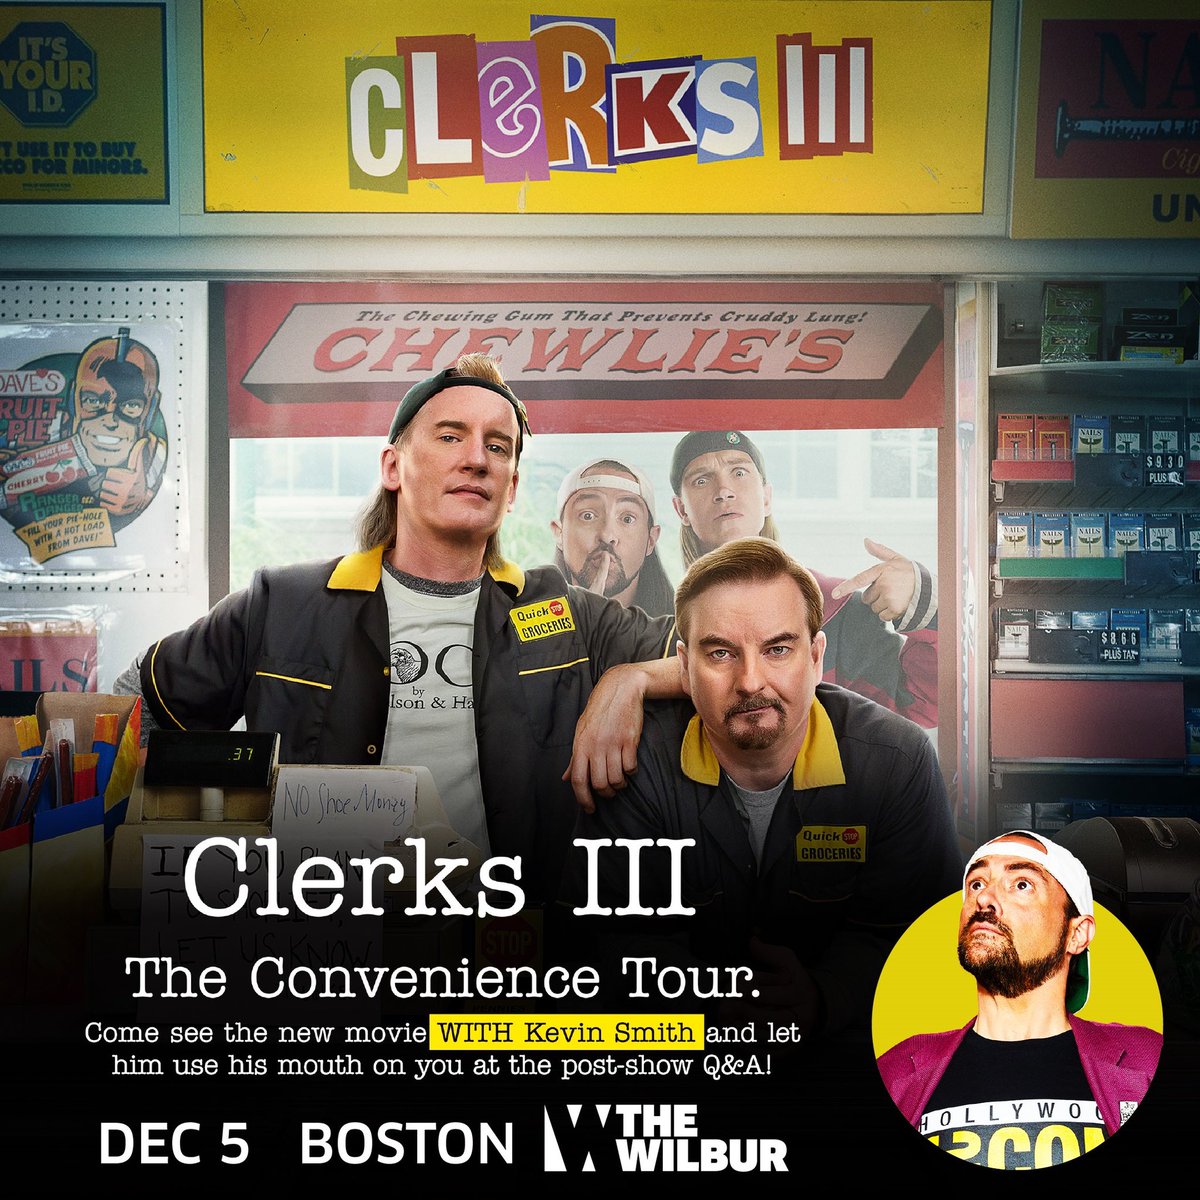 BOSTON! The Convenience Tour is making a quick stop at @The_Wilbur ONE WEEK FROM TODAY! Come see the @ClerksMovie with me at the 51st of our 52 screenings since September 4th! @BrianCOHalloran will be there with me! Get tickets at ticketmaster.com/event/01005D42…!